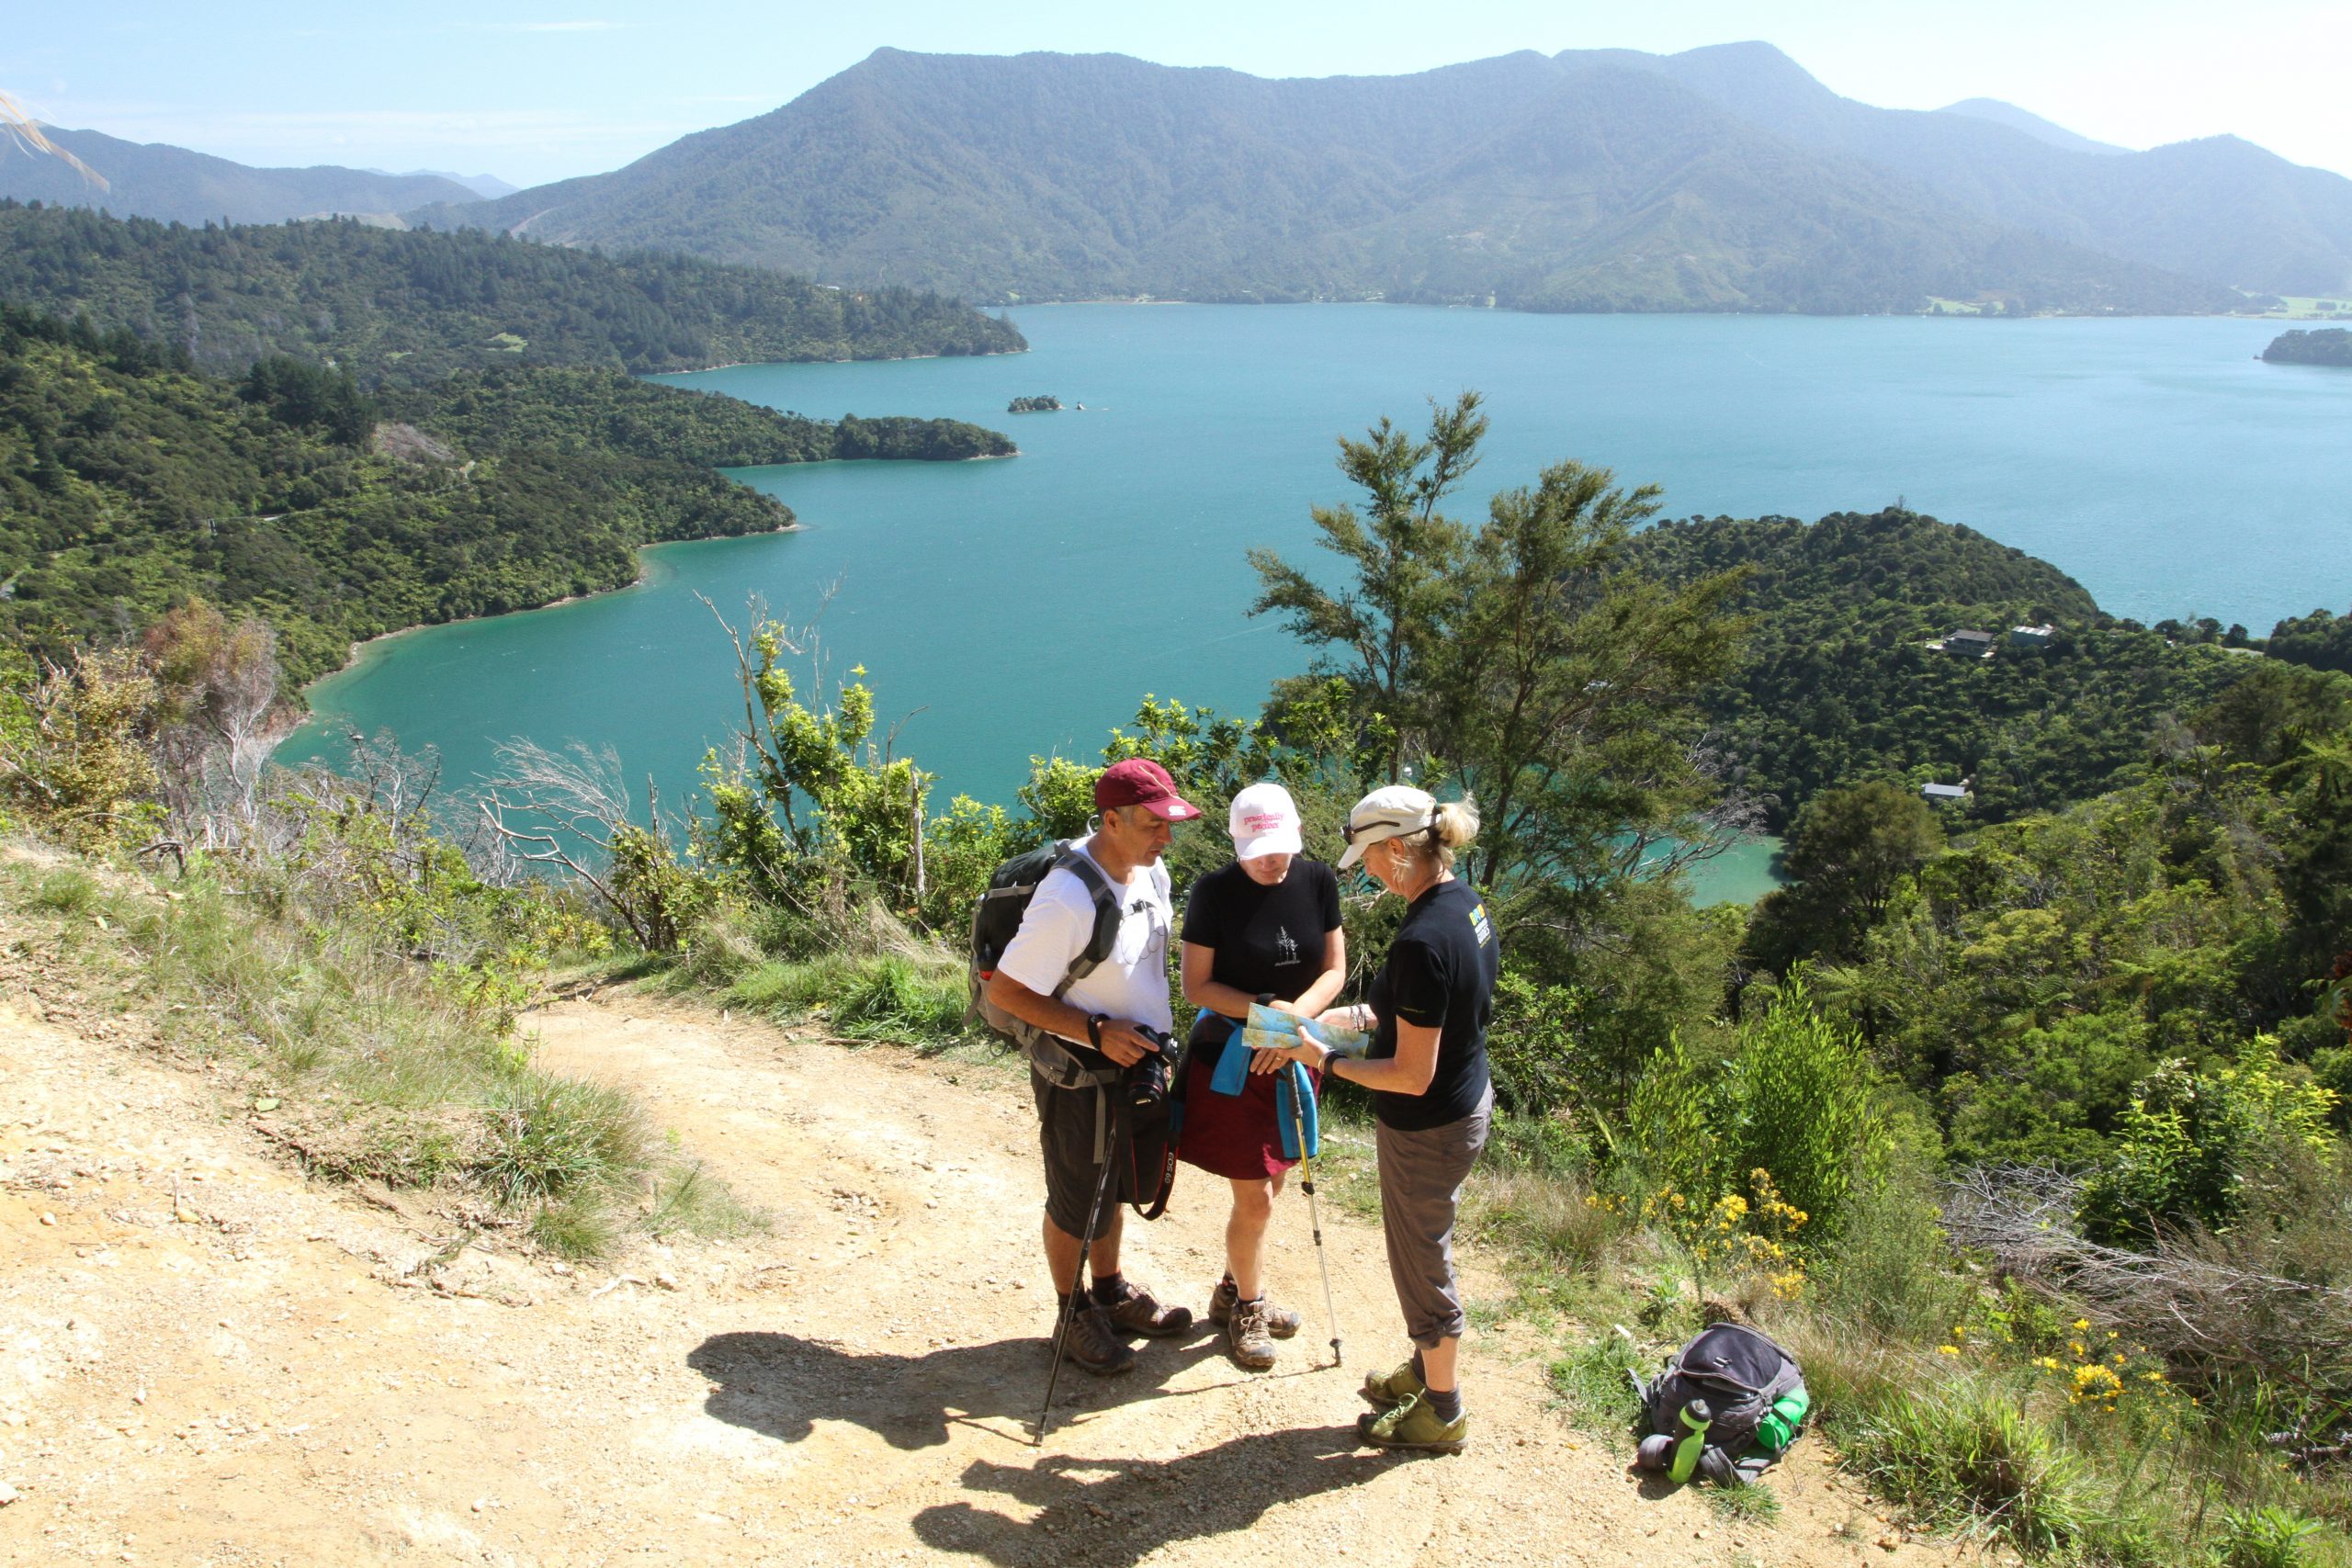 Walk the Queen Charlotte Track